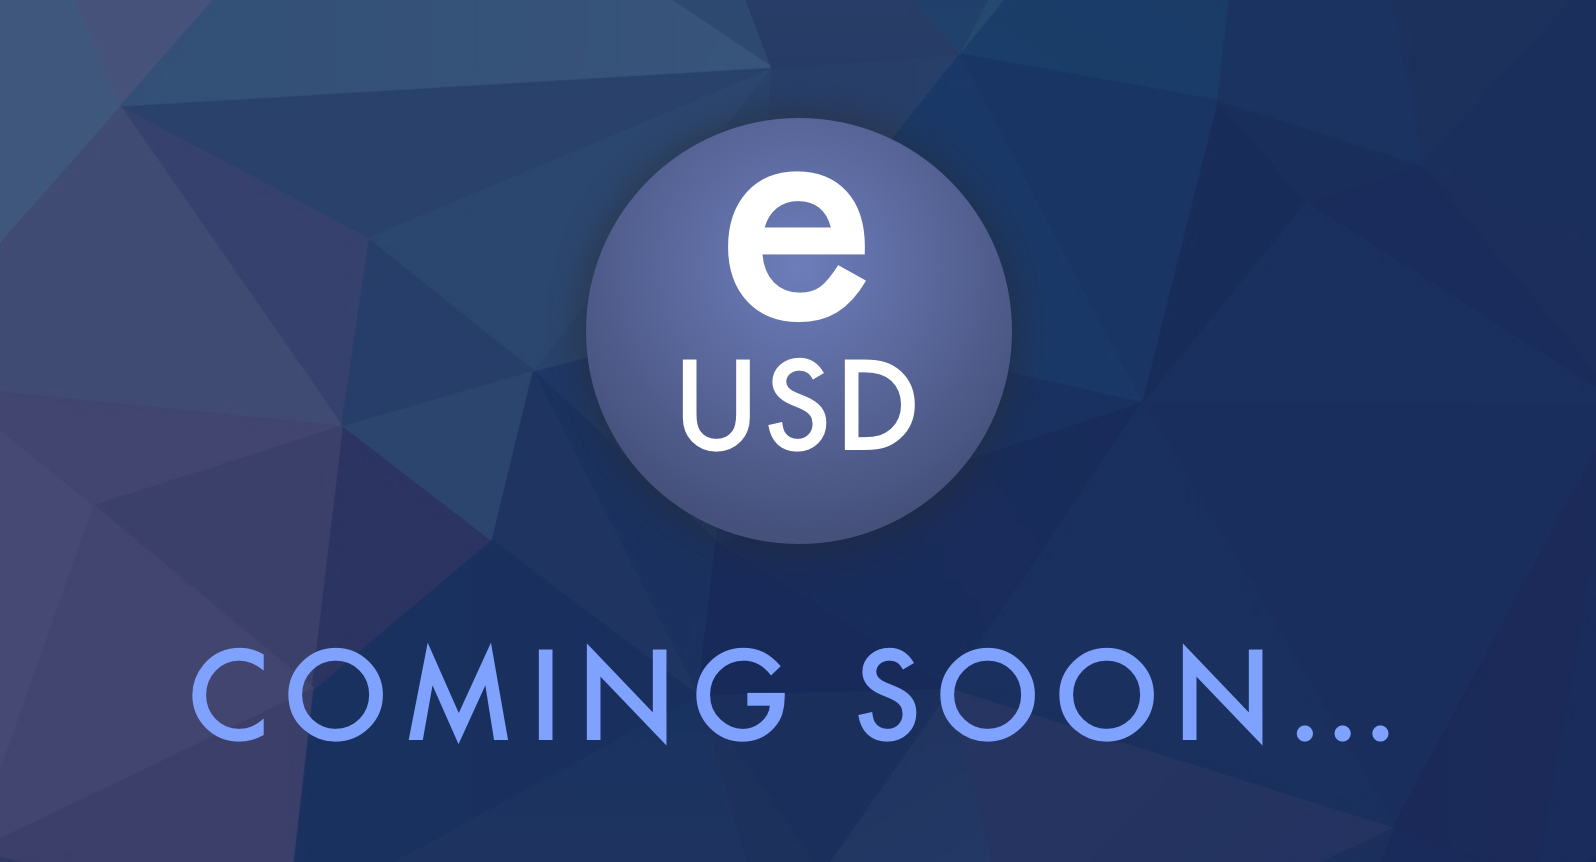 The full launch of eUSD is coming next week!